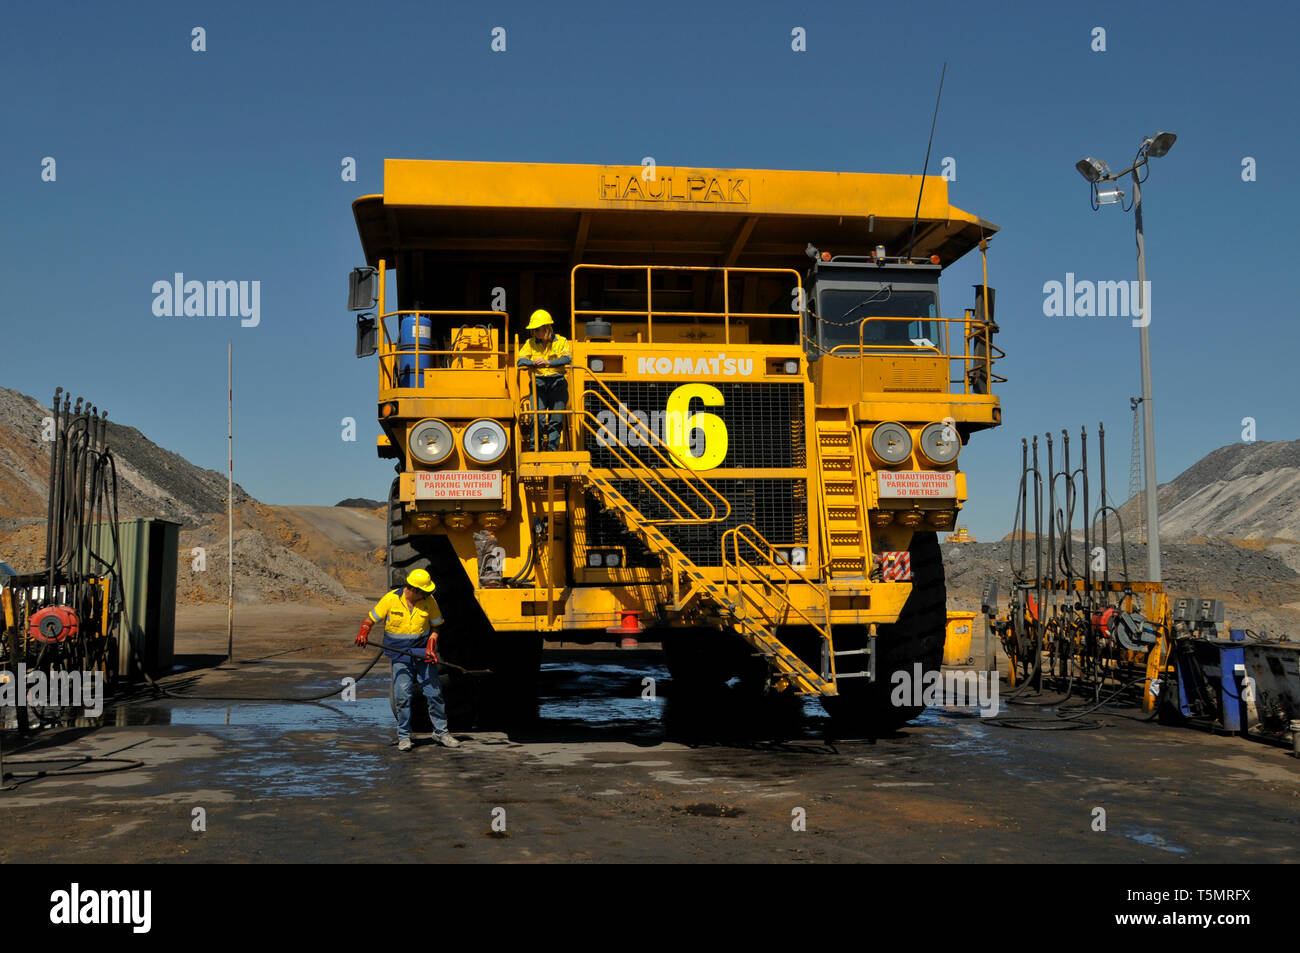 A fronton view of a Haulpac coal transport truck, undergoing a high pressure wash, at a coal mine site. Stock Photo